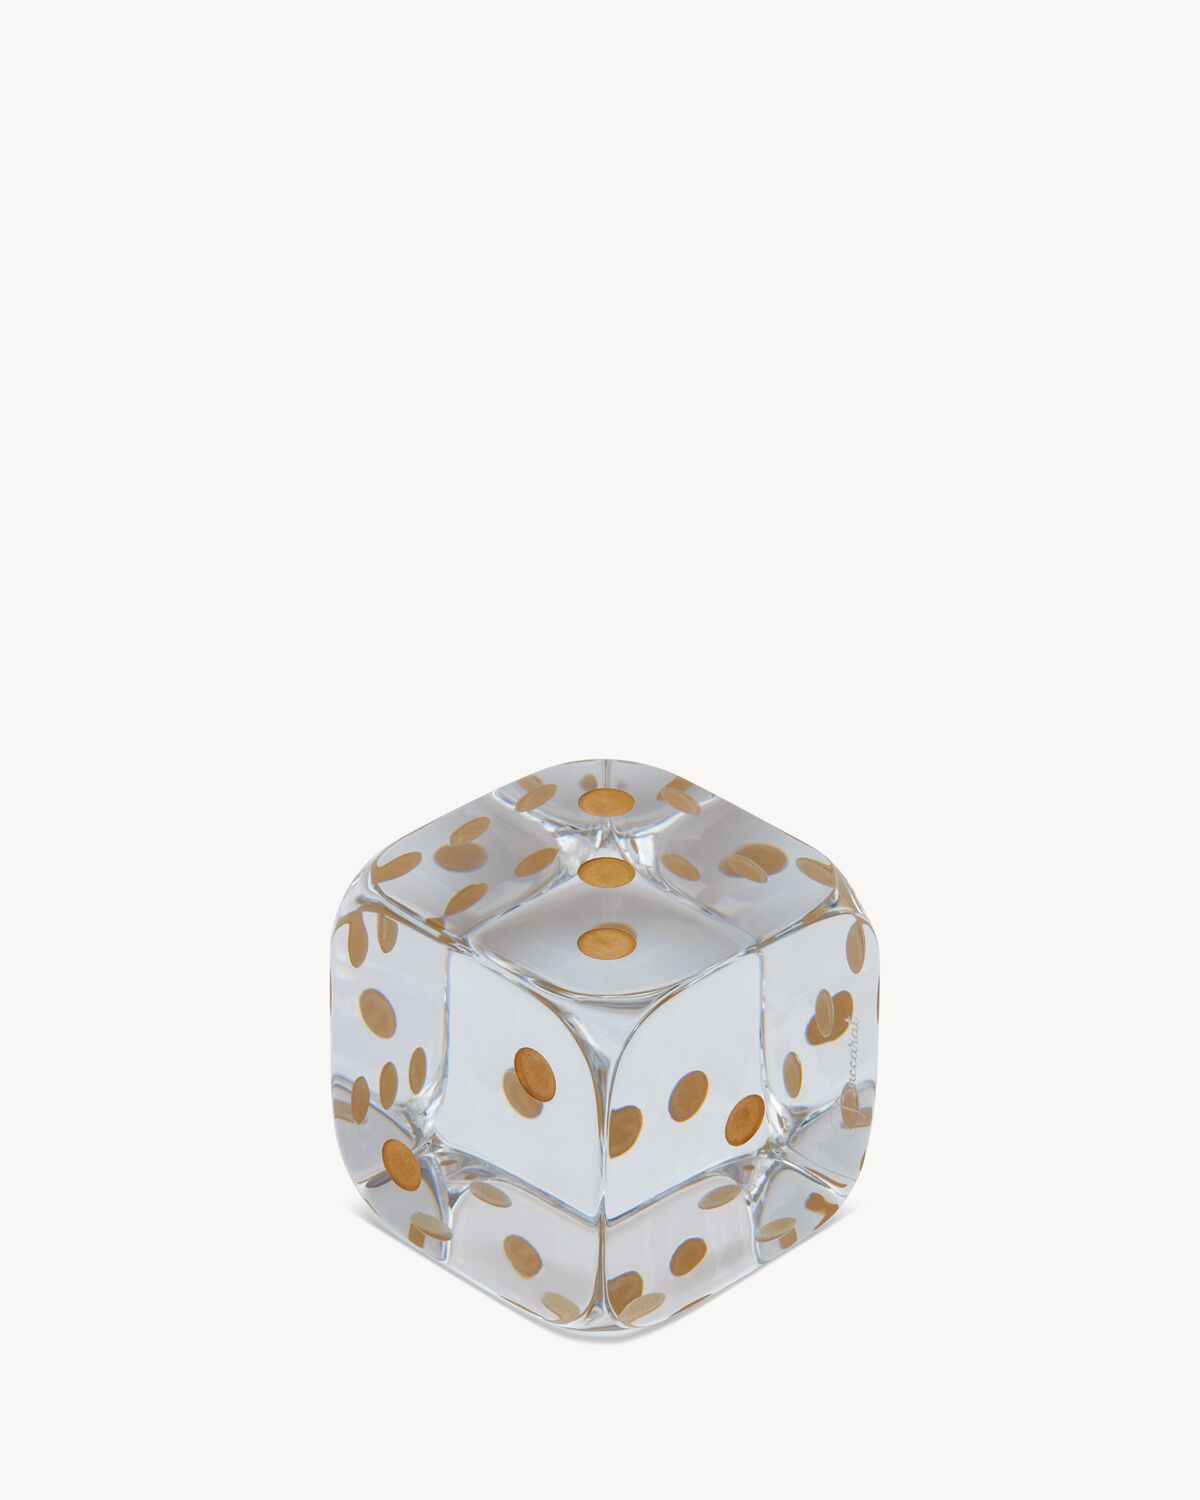 Baccarat dice paperweight in crystal